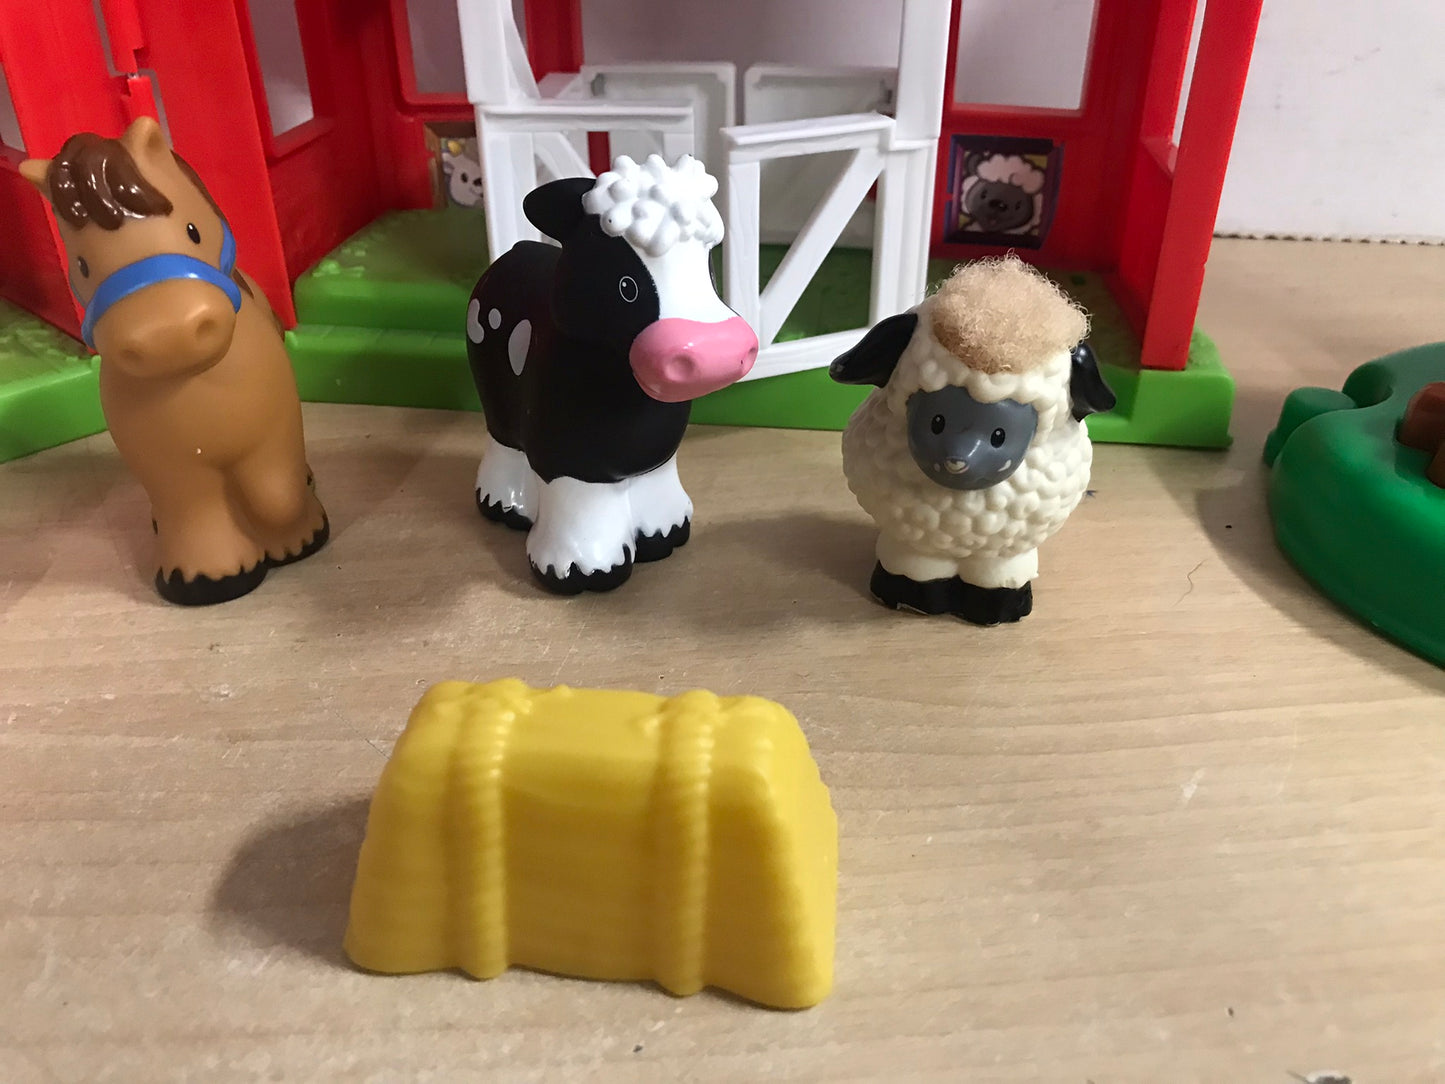 Fisher Price Little People Play Family Farm with Silo and Pond With Real Sounds Excellent As New